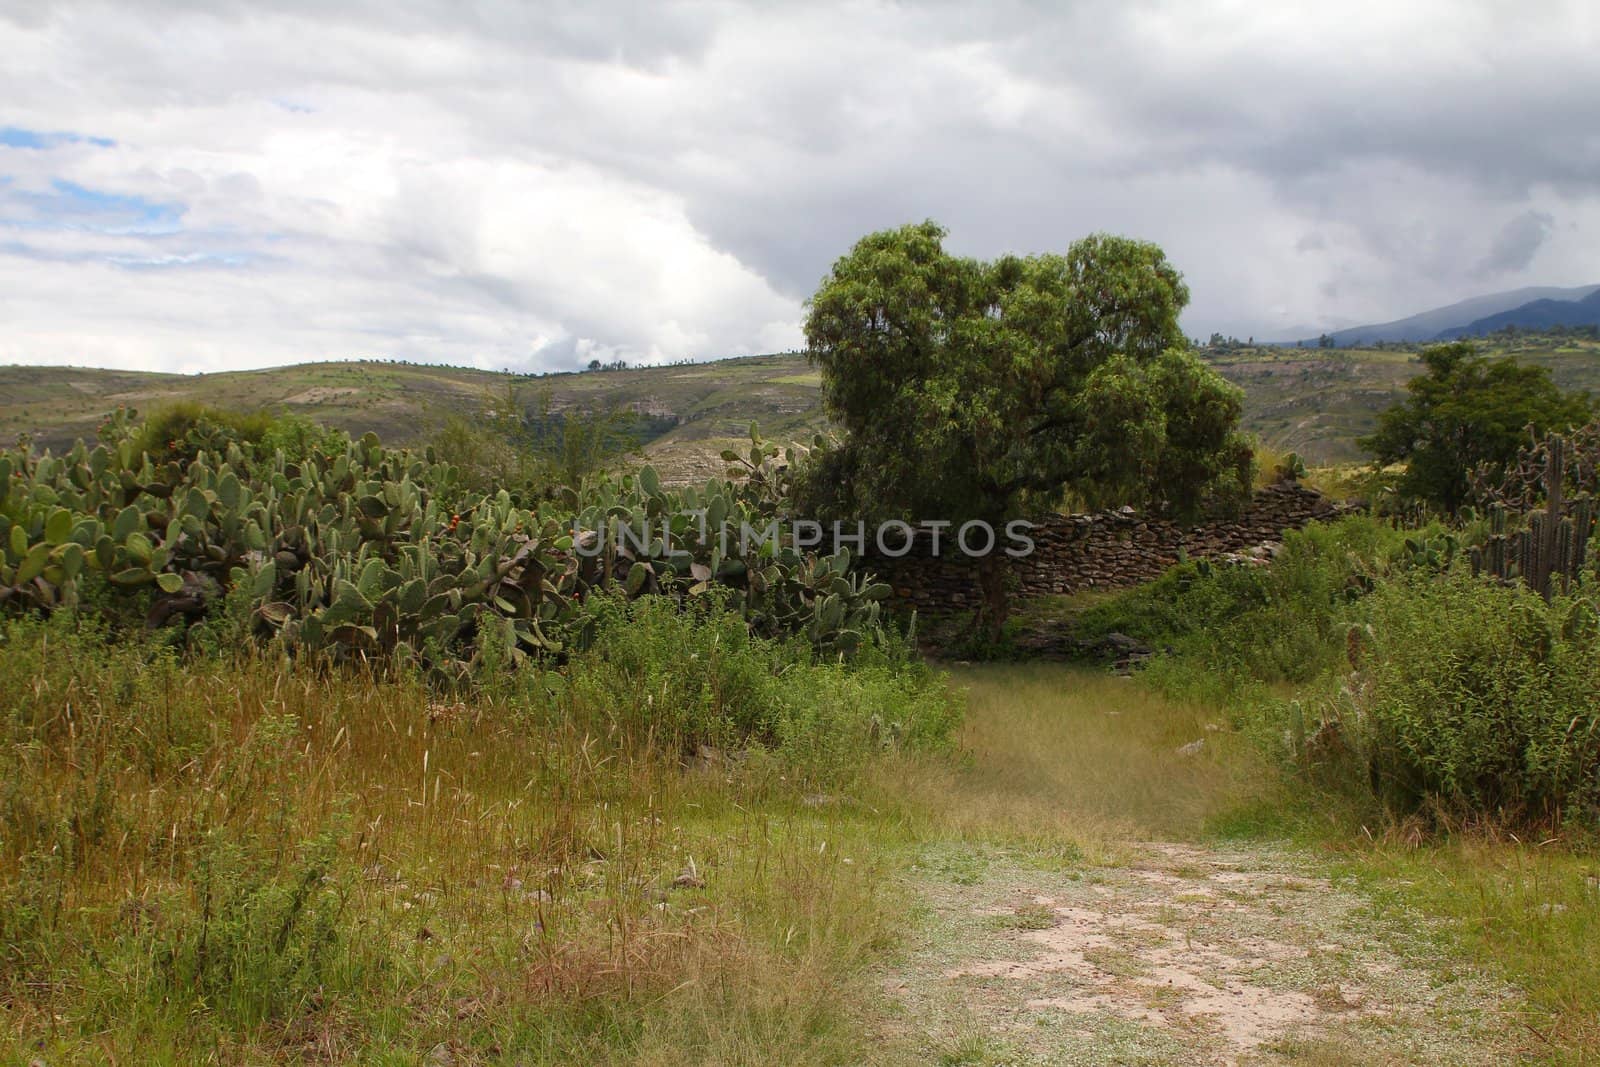 Countryside landscape and indigenous Wari wall in Peru
